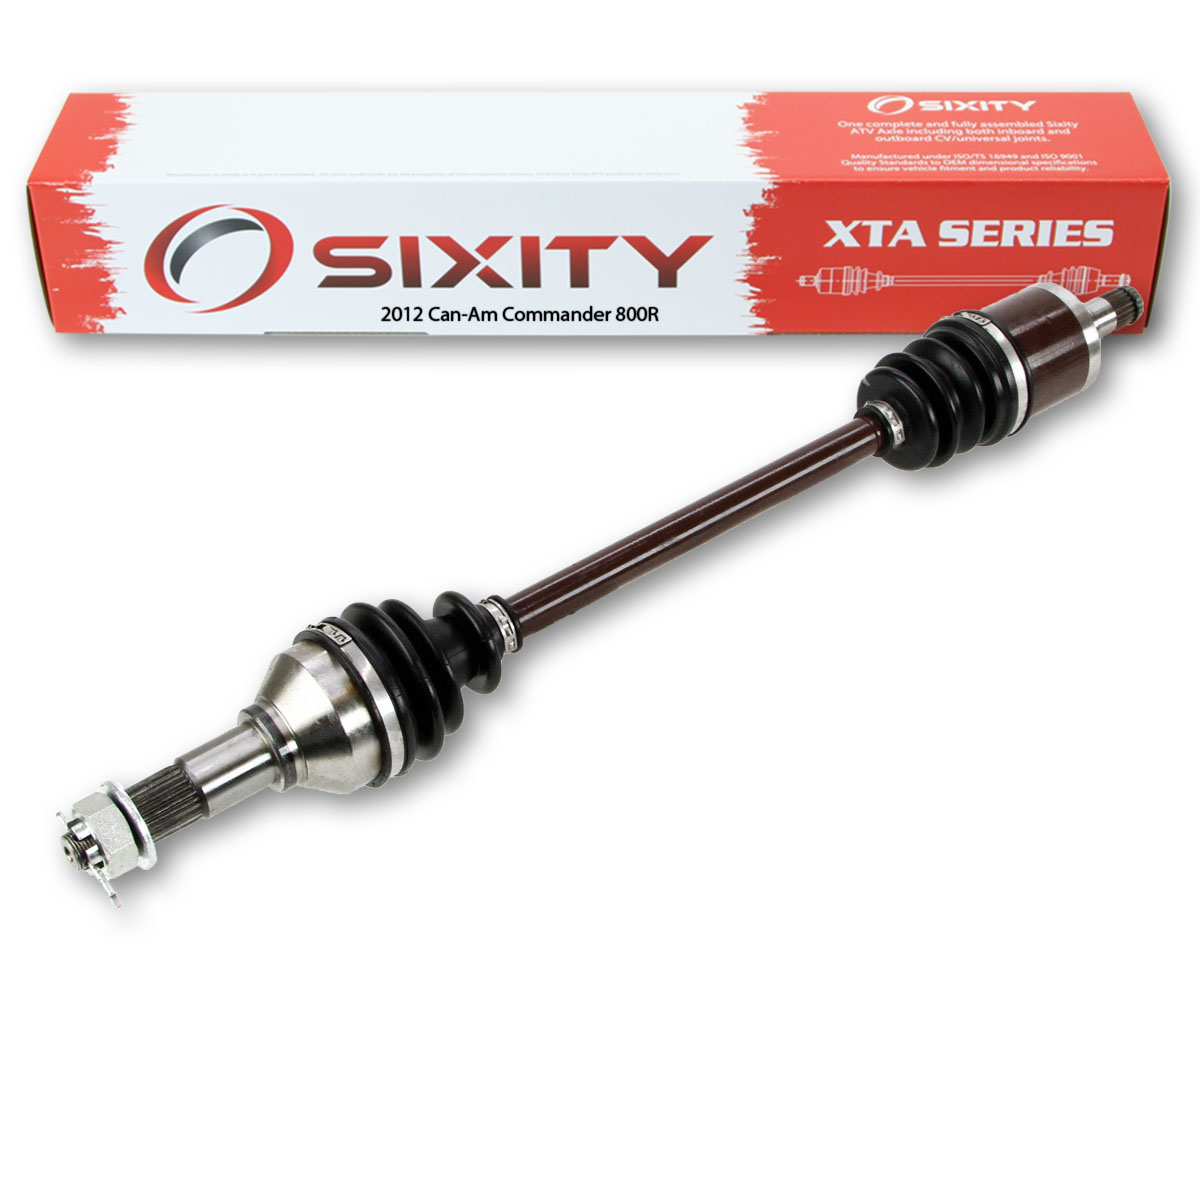 Sixity 2012 Can-Am Commander 800R 4X4 Front Left XTA ATV Axle